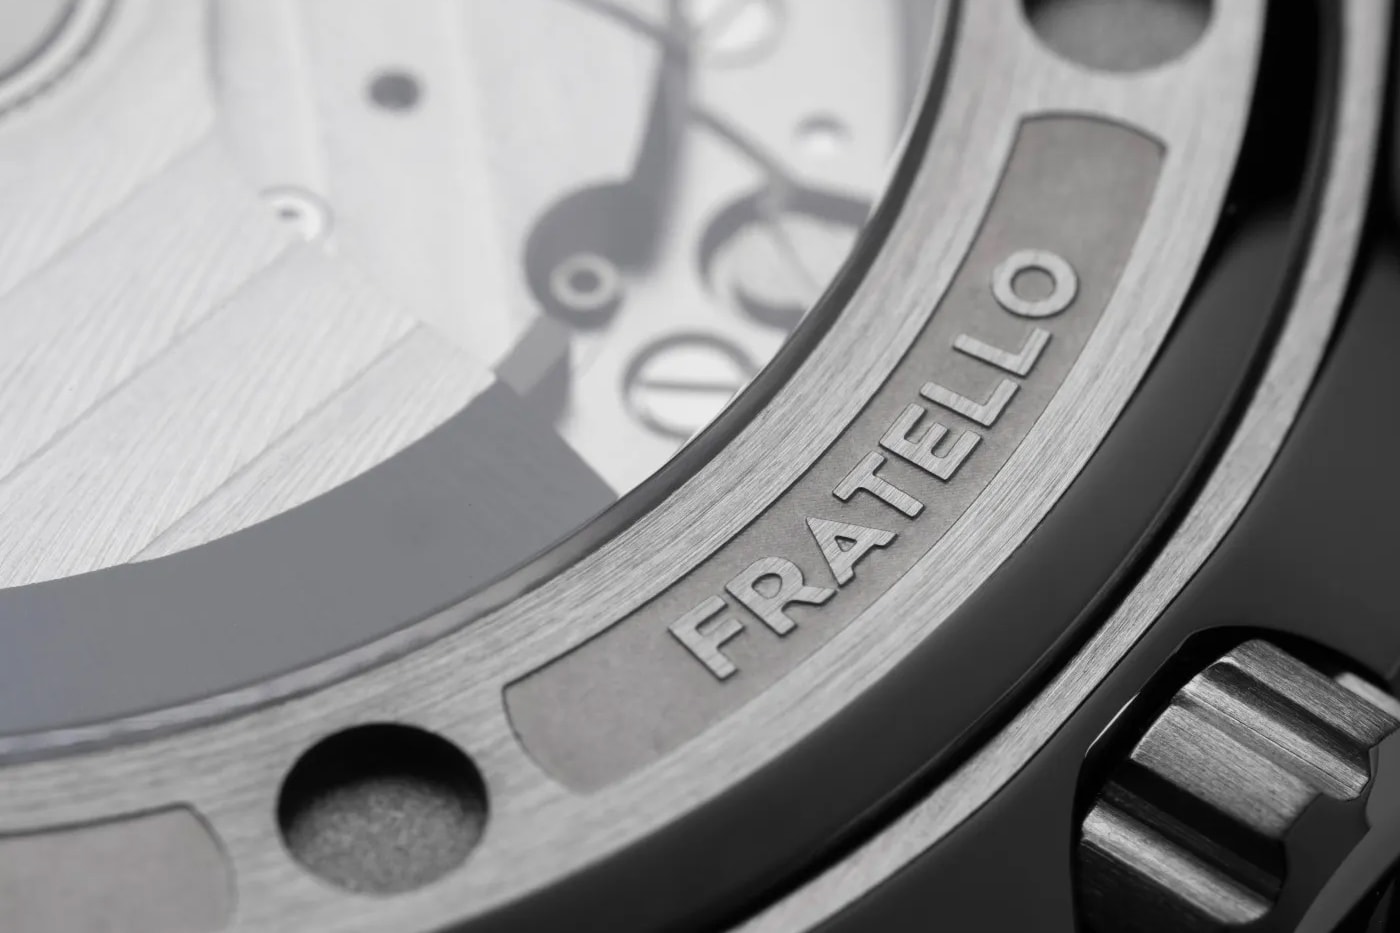 Fratello × Straum Jan Mayen Limited-Edition Sports Watch Lava-Red Fumé Dial Release Info